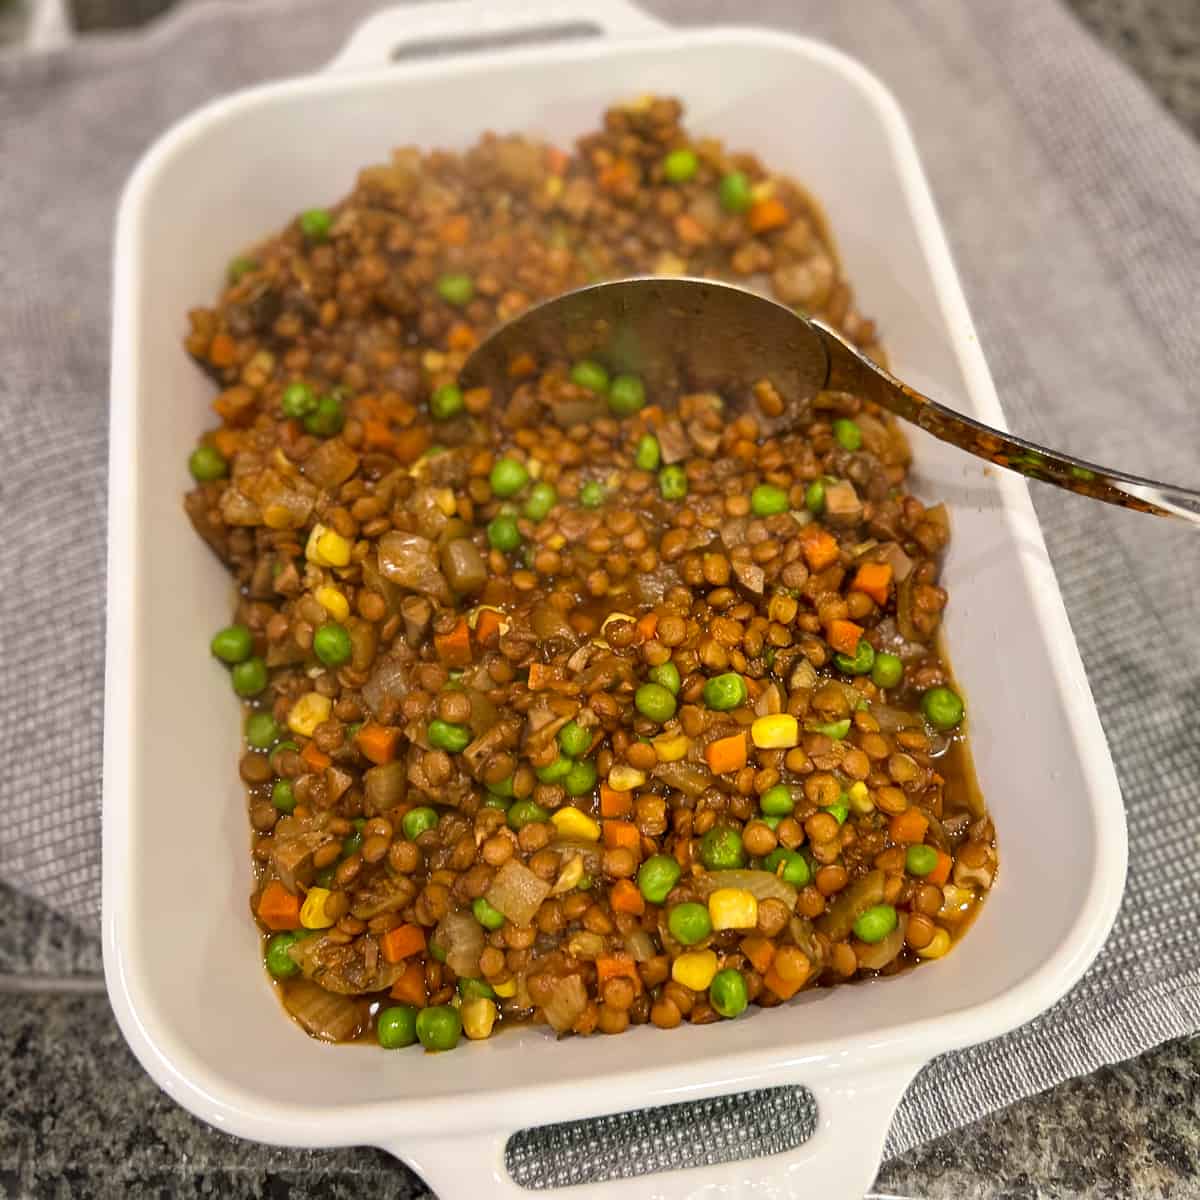 top side view of lentil and veggie mixture in a white rectangular casserole dish with large cooking spoon